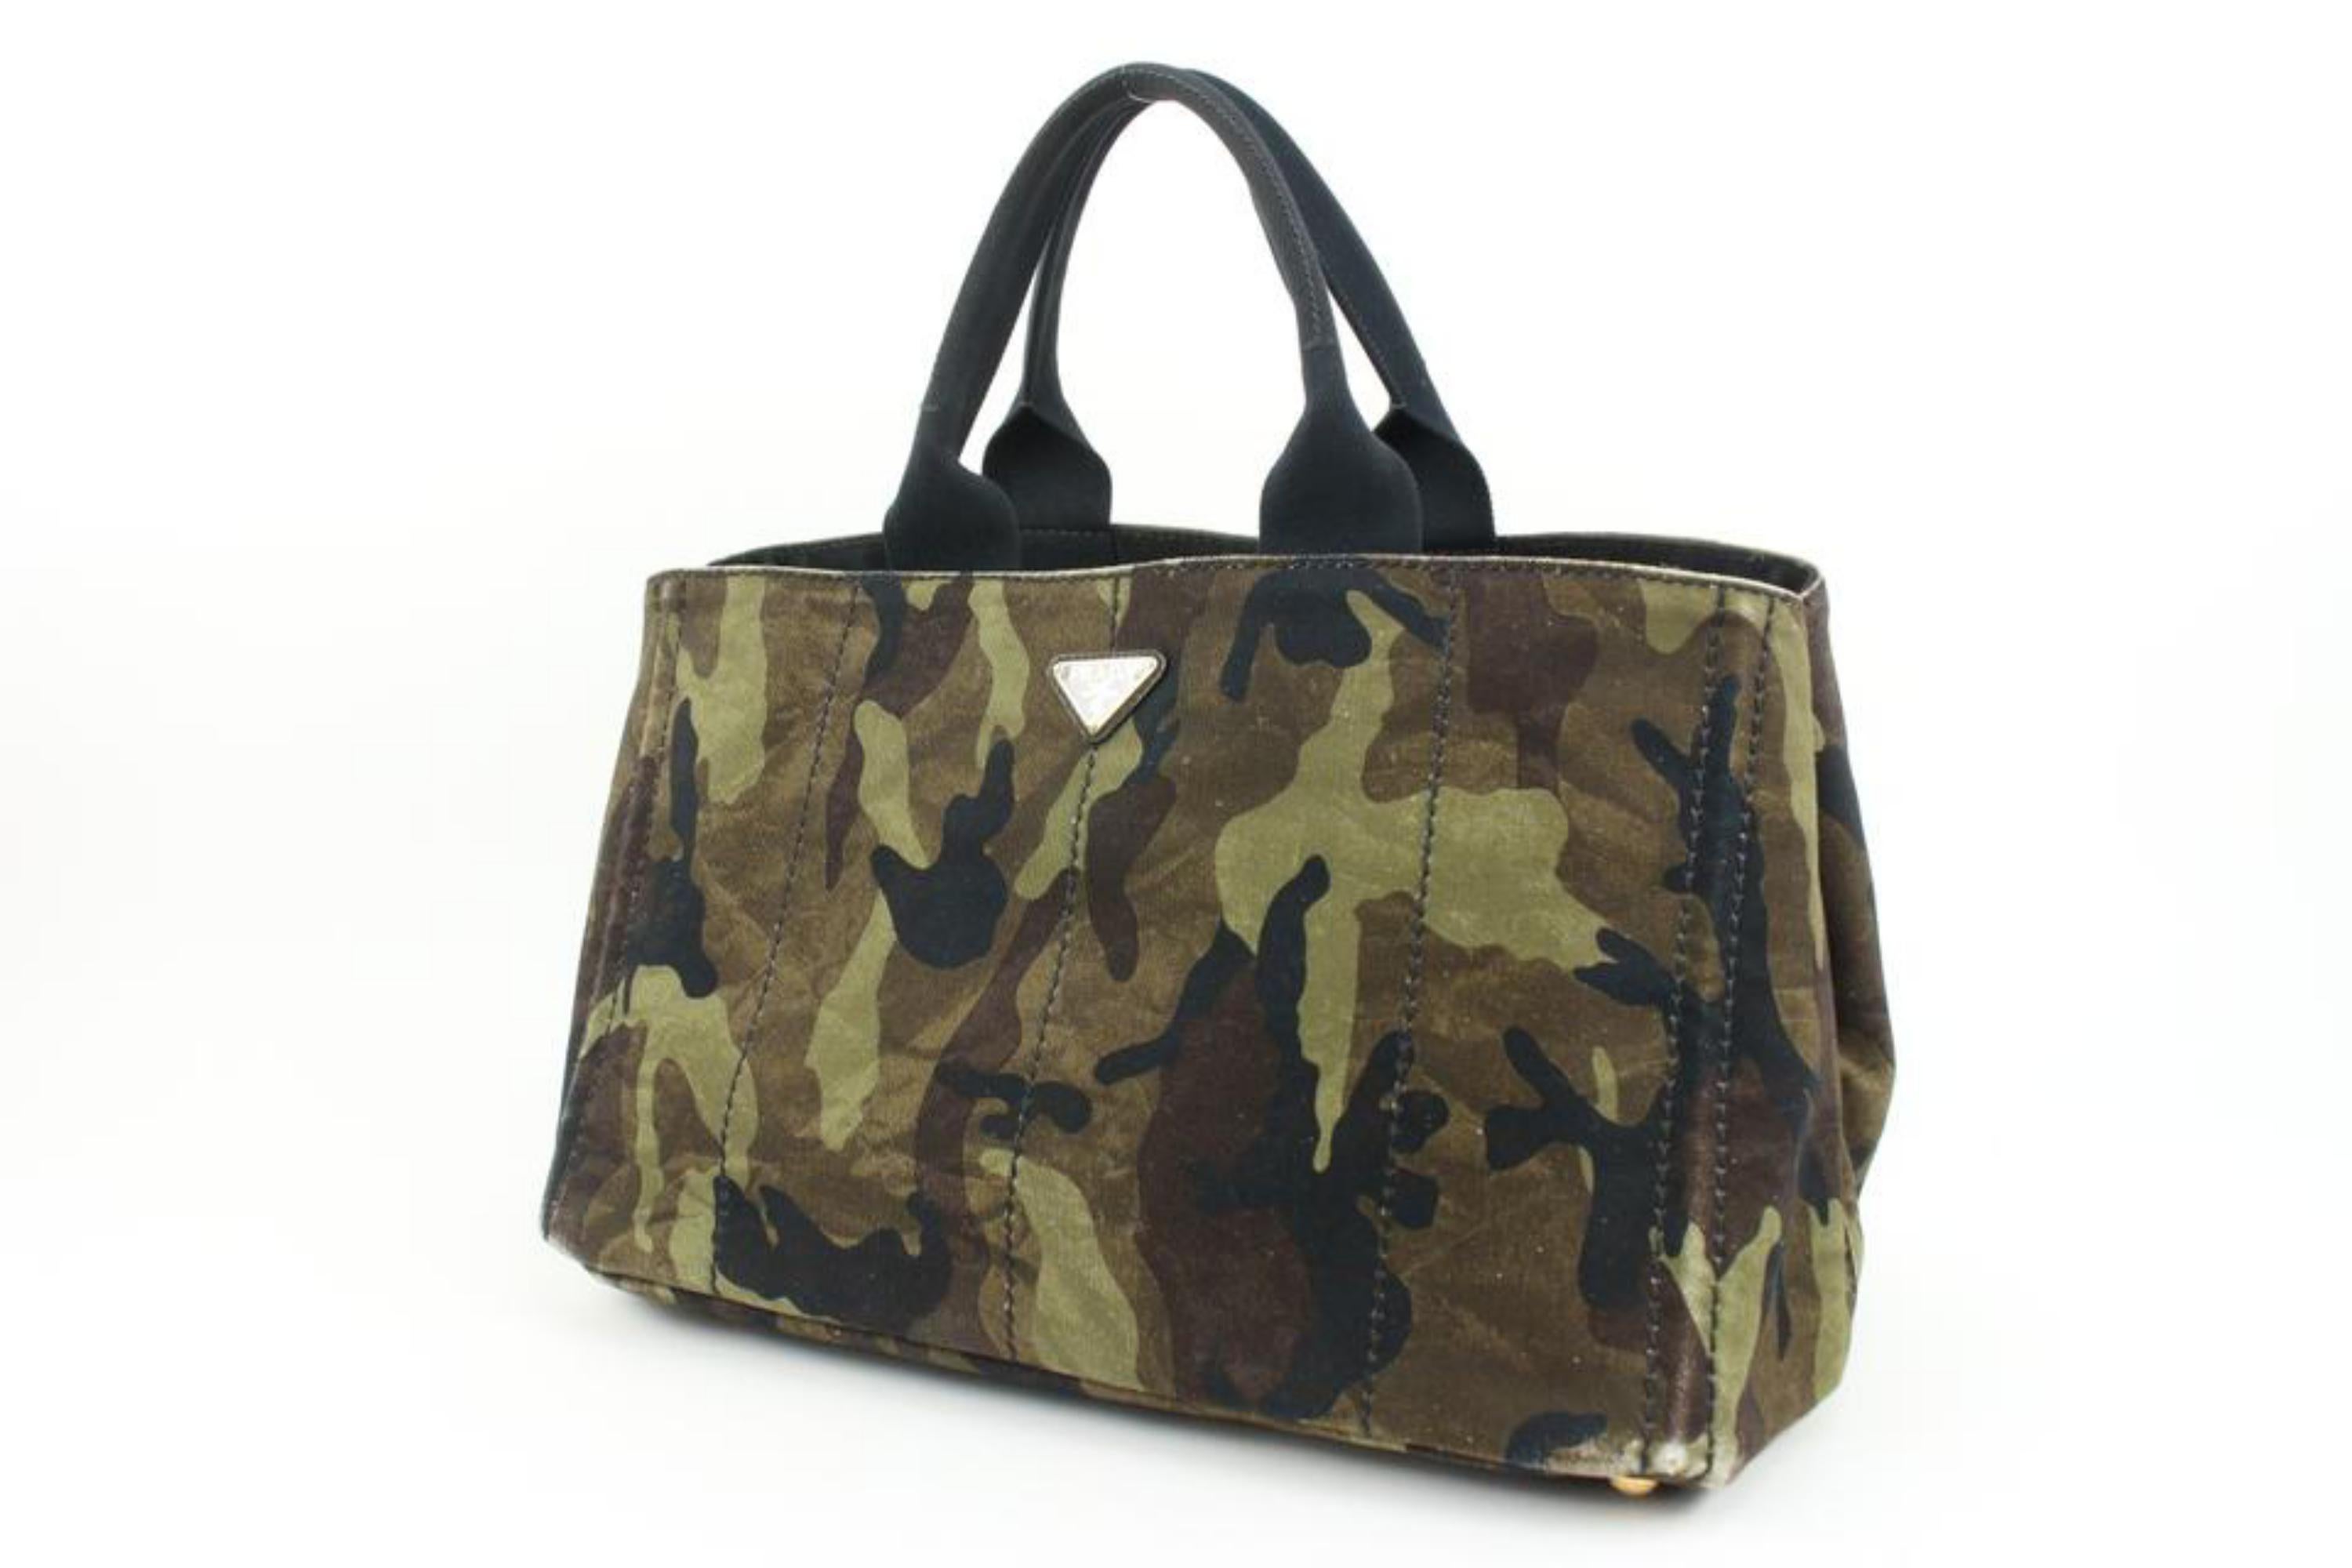 Prada Camouflage Canapa Tote Camo Bag 70p32s
Date Code/Serial Number: 180
Made In: Italy
Measurements: Length:  16